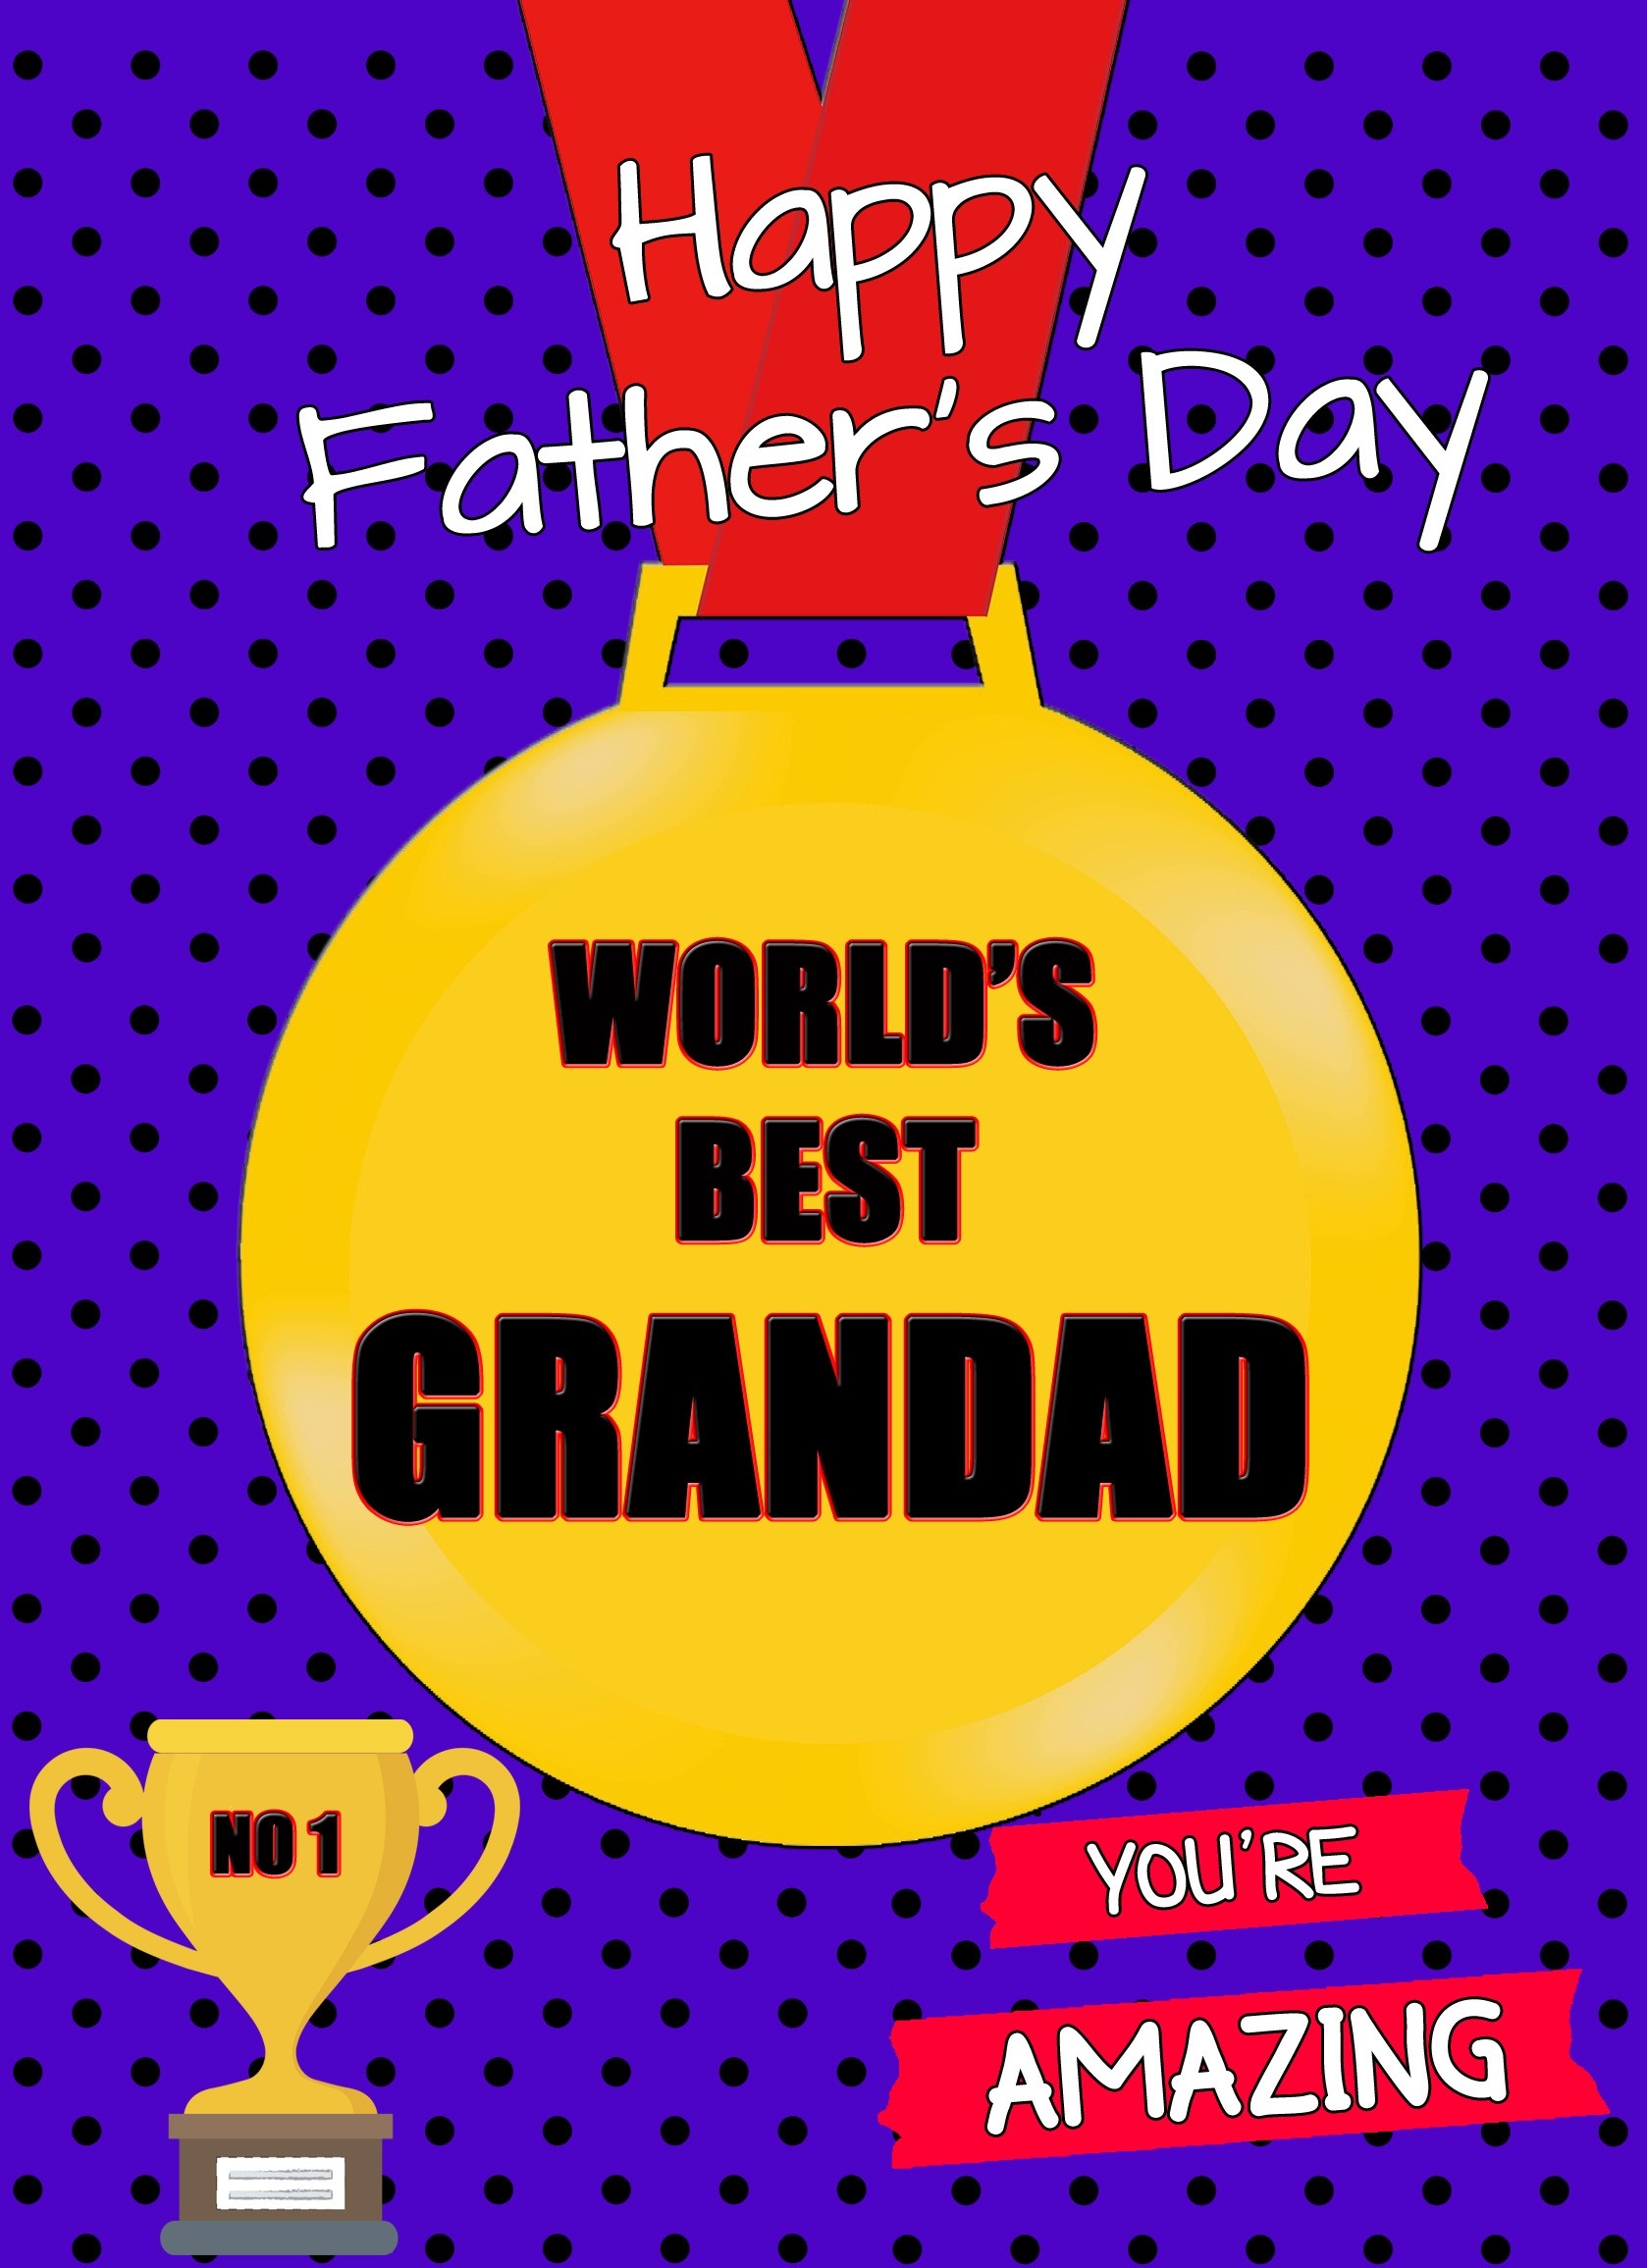 Fathers Day Card (Grandad, Medal)